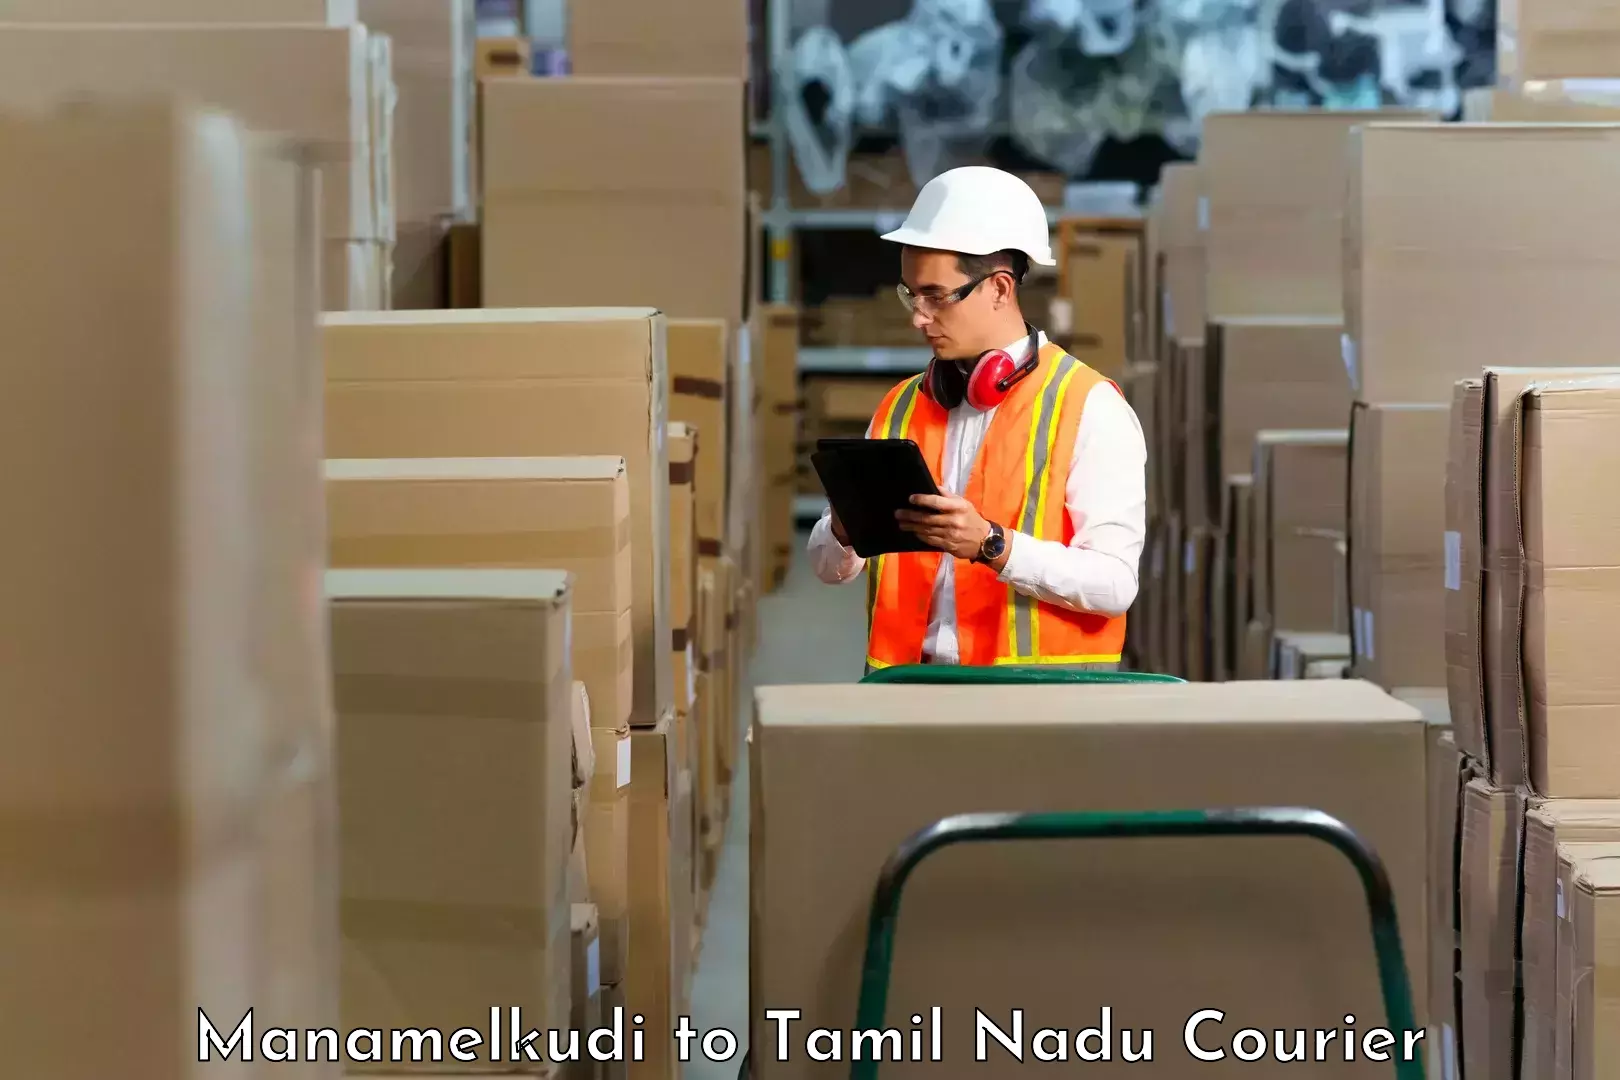 Express delivery network Manamelkudi to Palacode